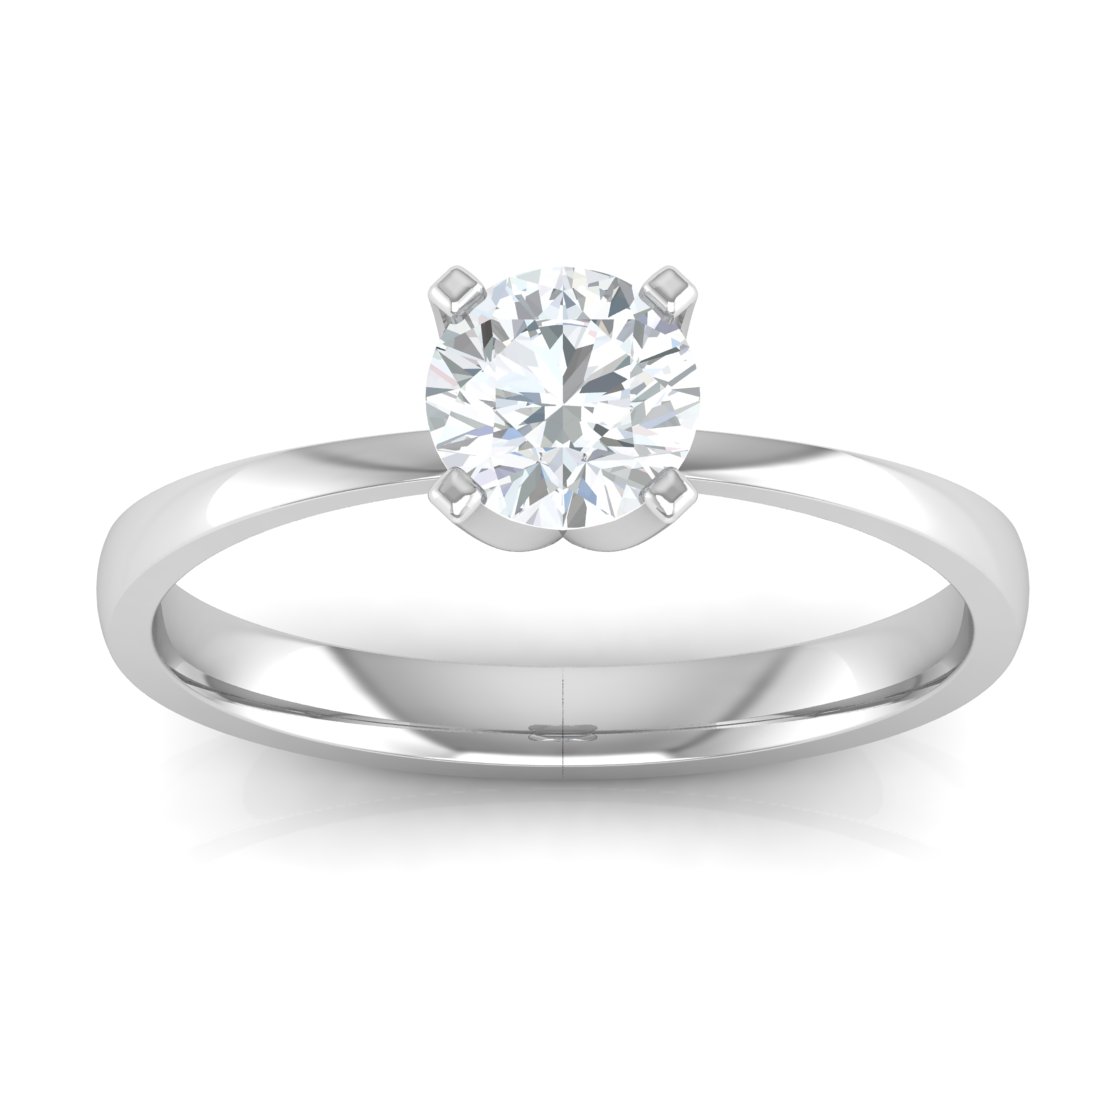 Engagement ring guide | Solitaire diamond ring 